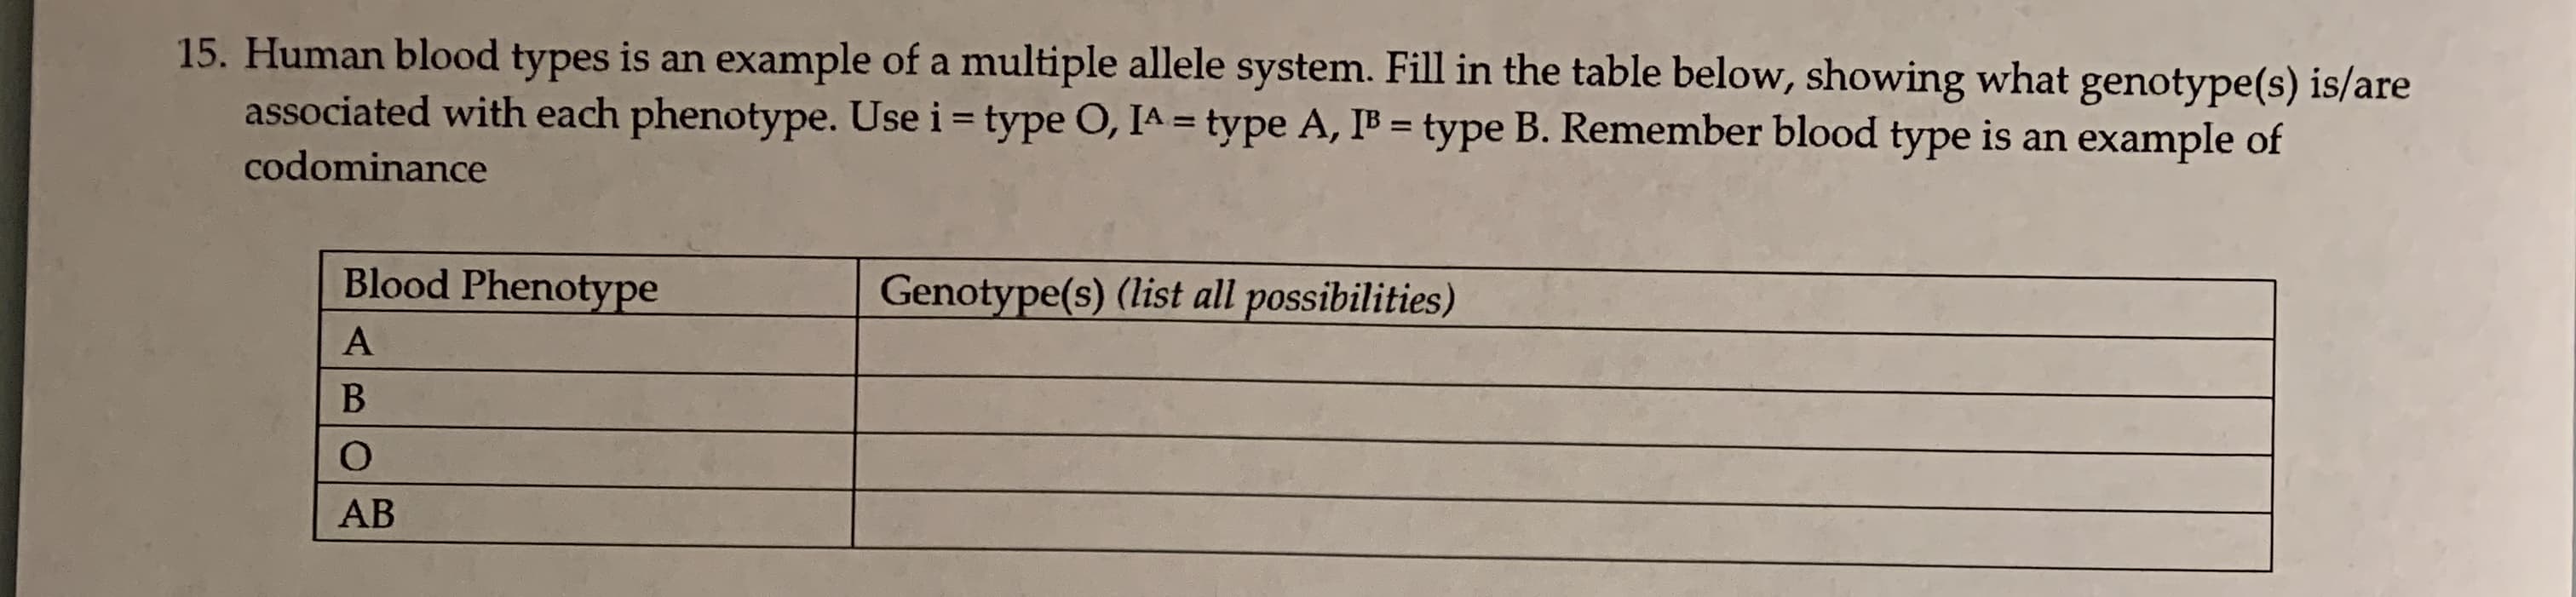 15. Human blood types is an example of a multiple allele system. Fill in the table below, showing what genotype(s) is/are
associated with each phenotype. Use i = type O, IA = type A, IB = type B. Remember blood type is an example of
codominance
Blood Phenotype
Genotype(s) (list all possibilities)
AB
